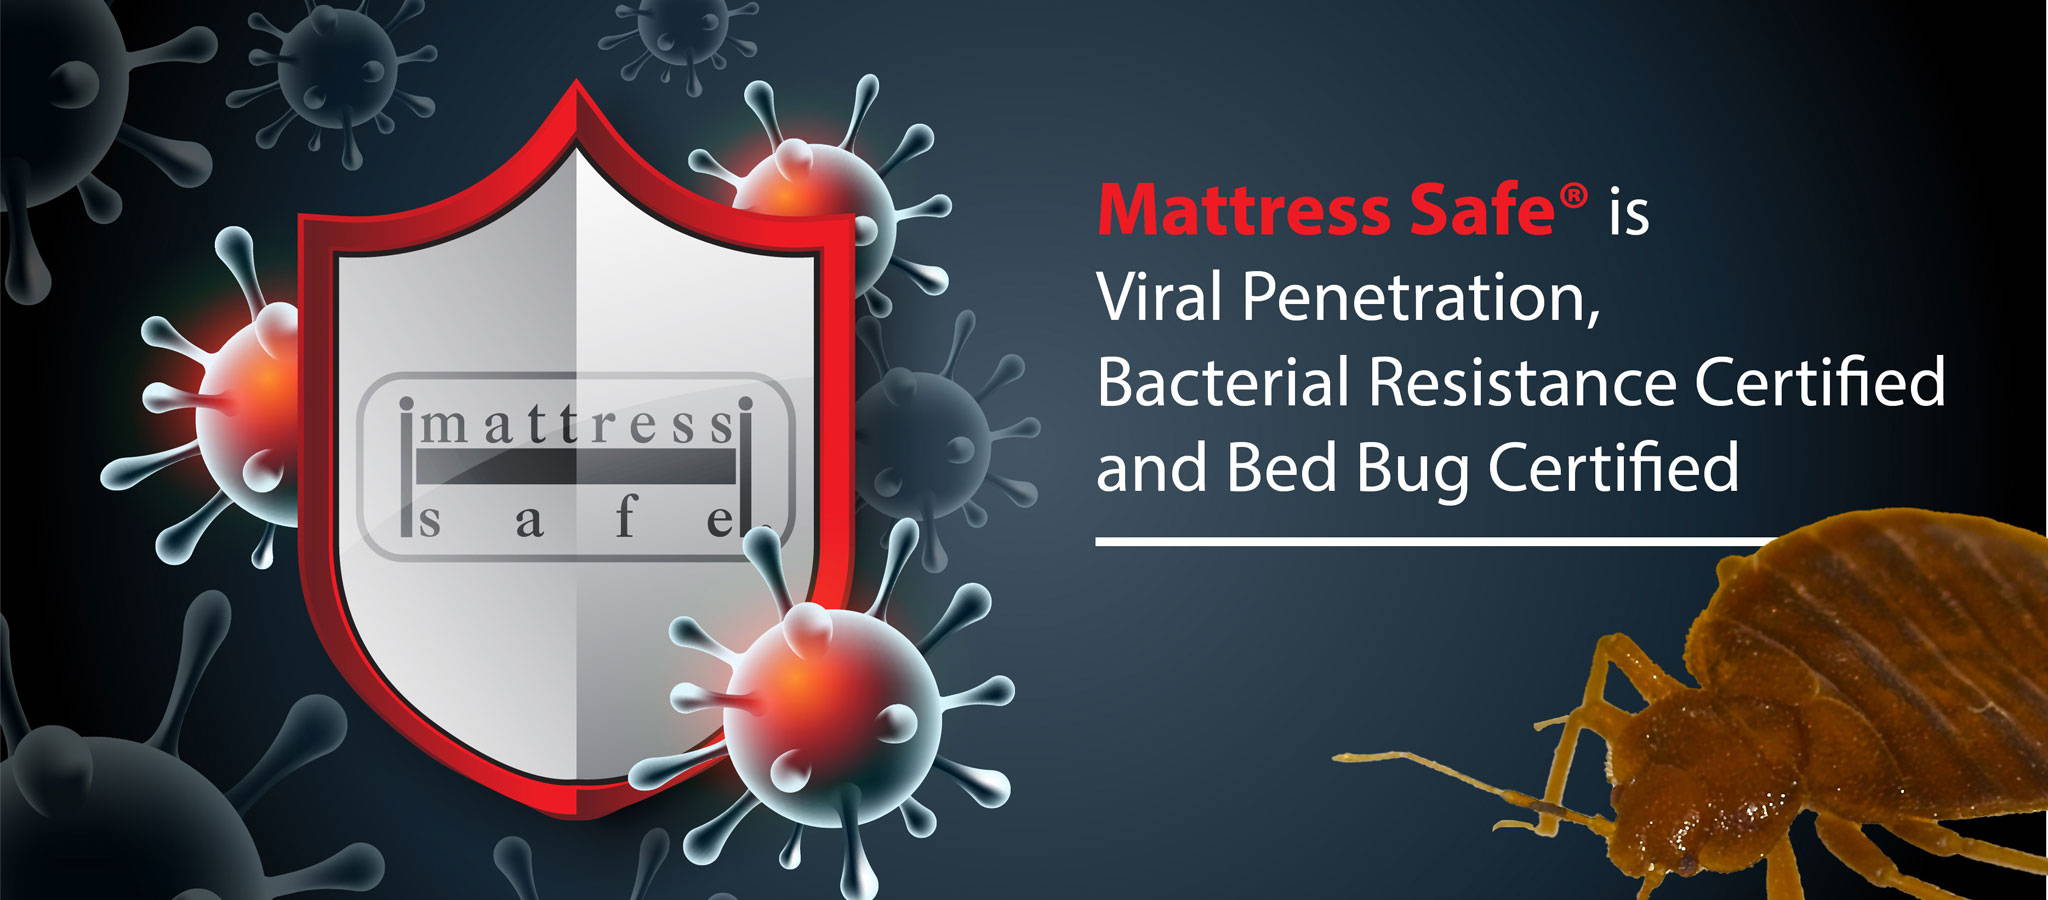 Virel penetration, bacterial resistance and Bed Bug Certified